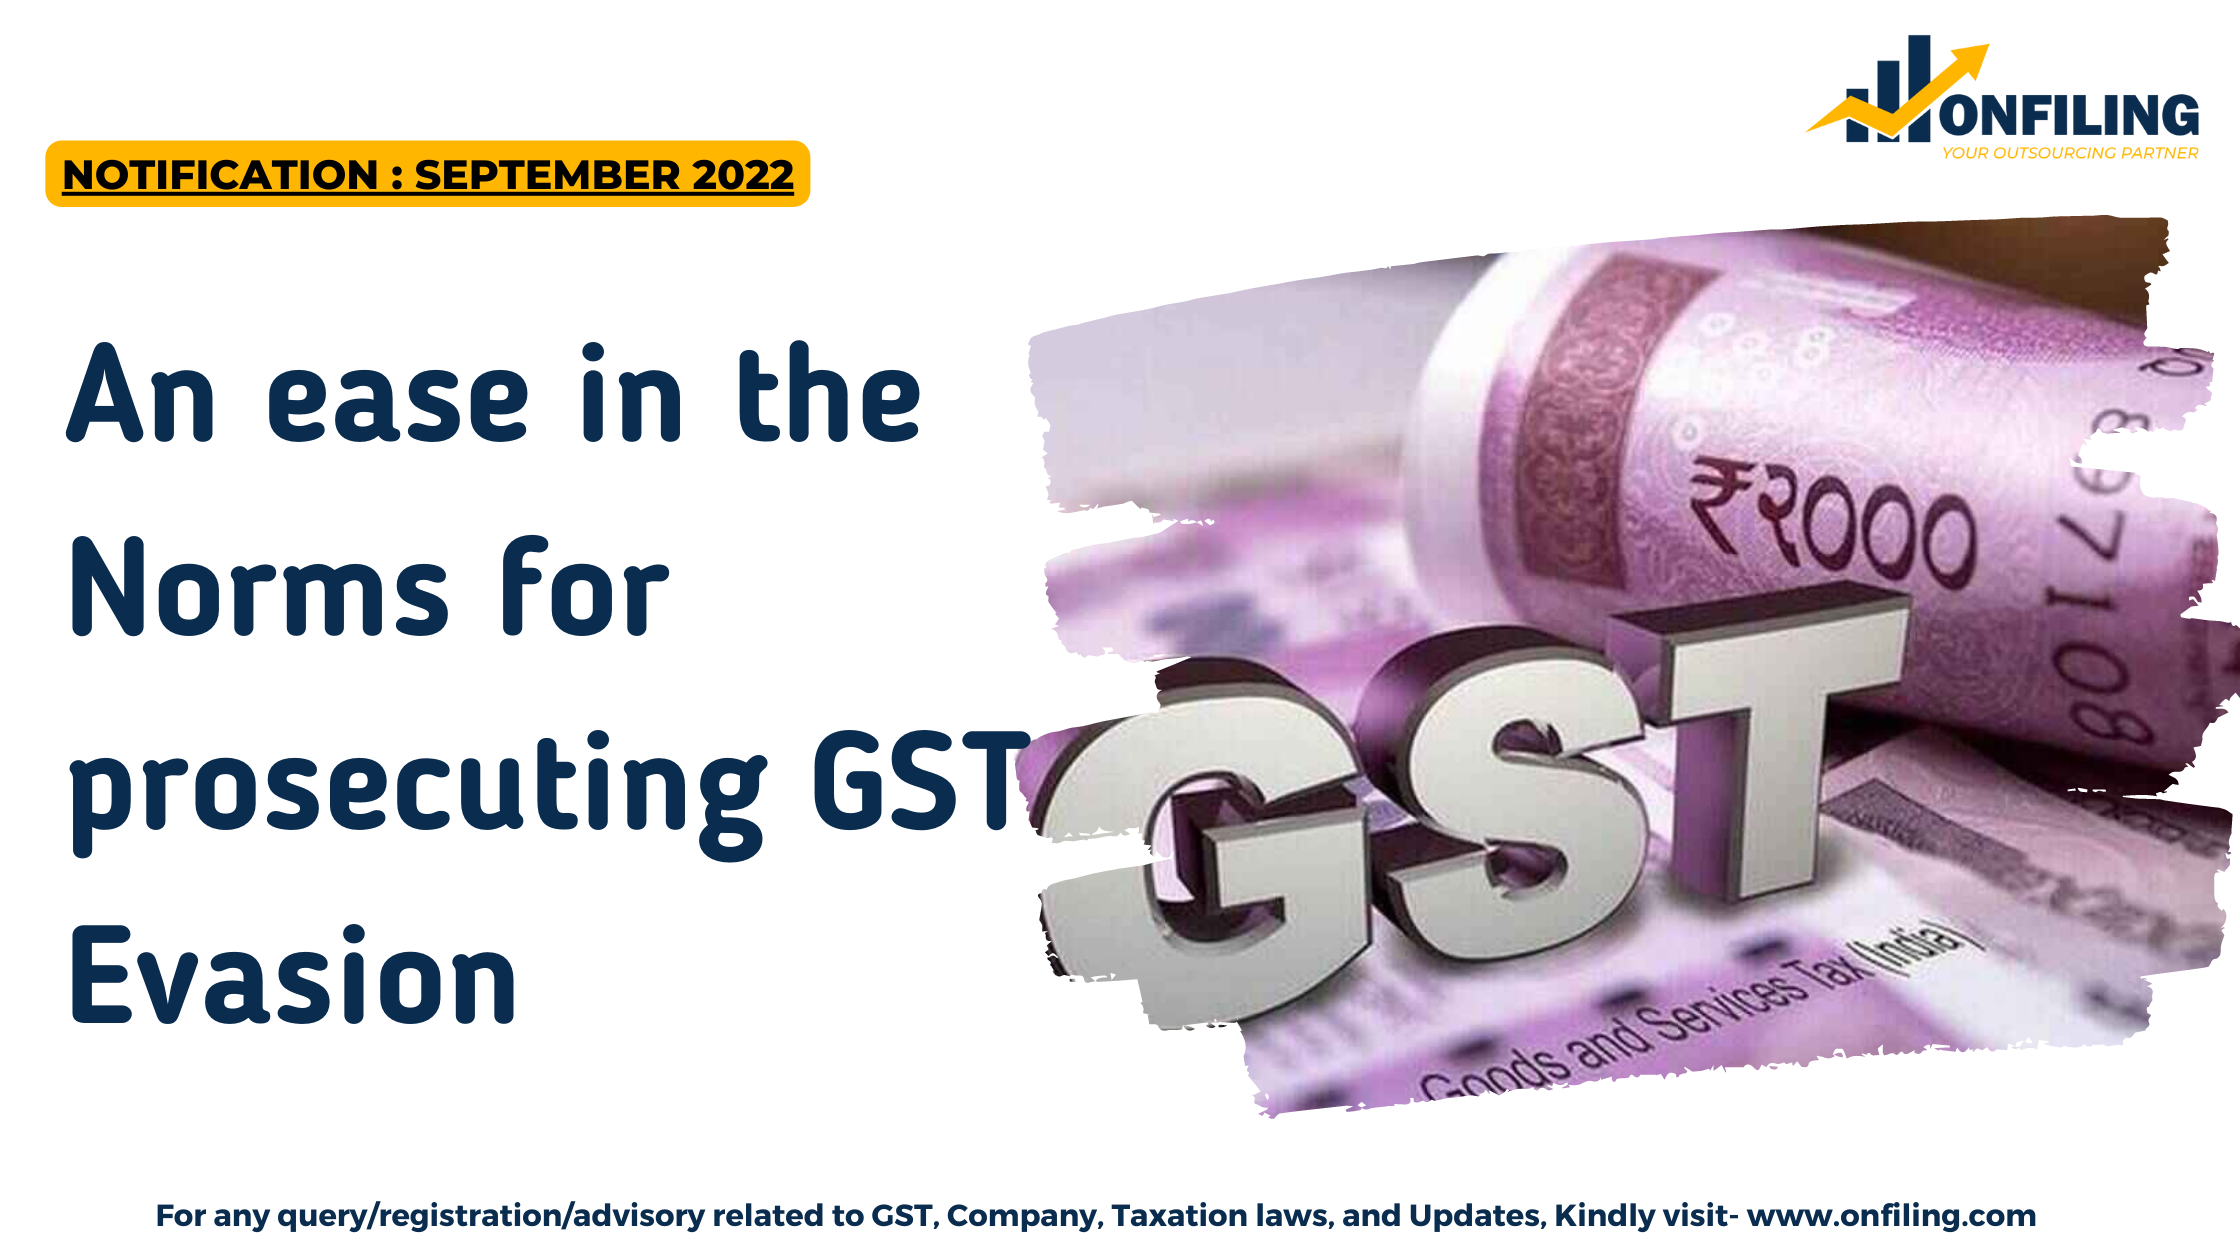 Norms for prosecuting GST